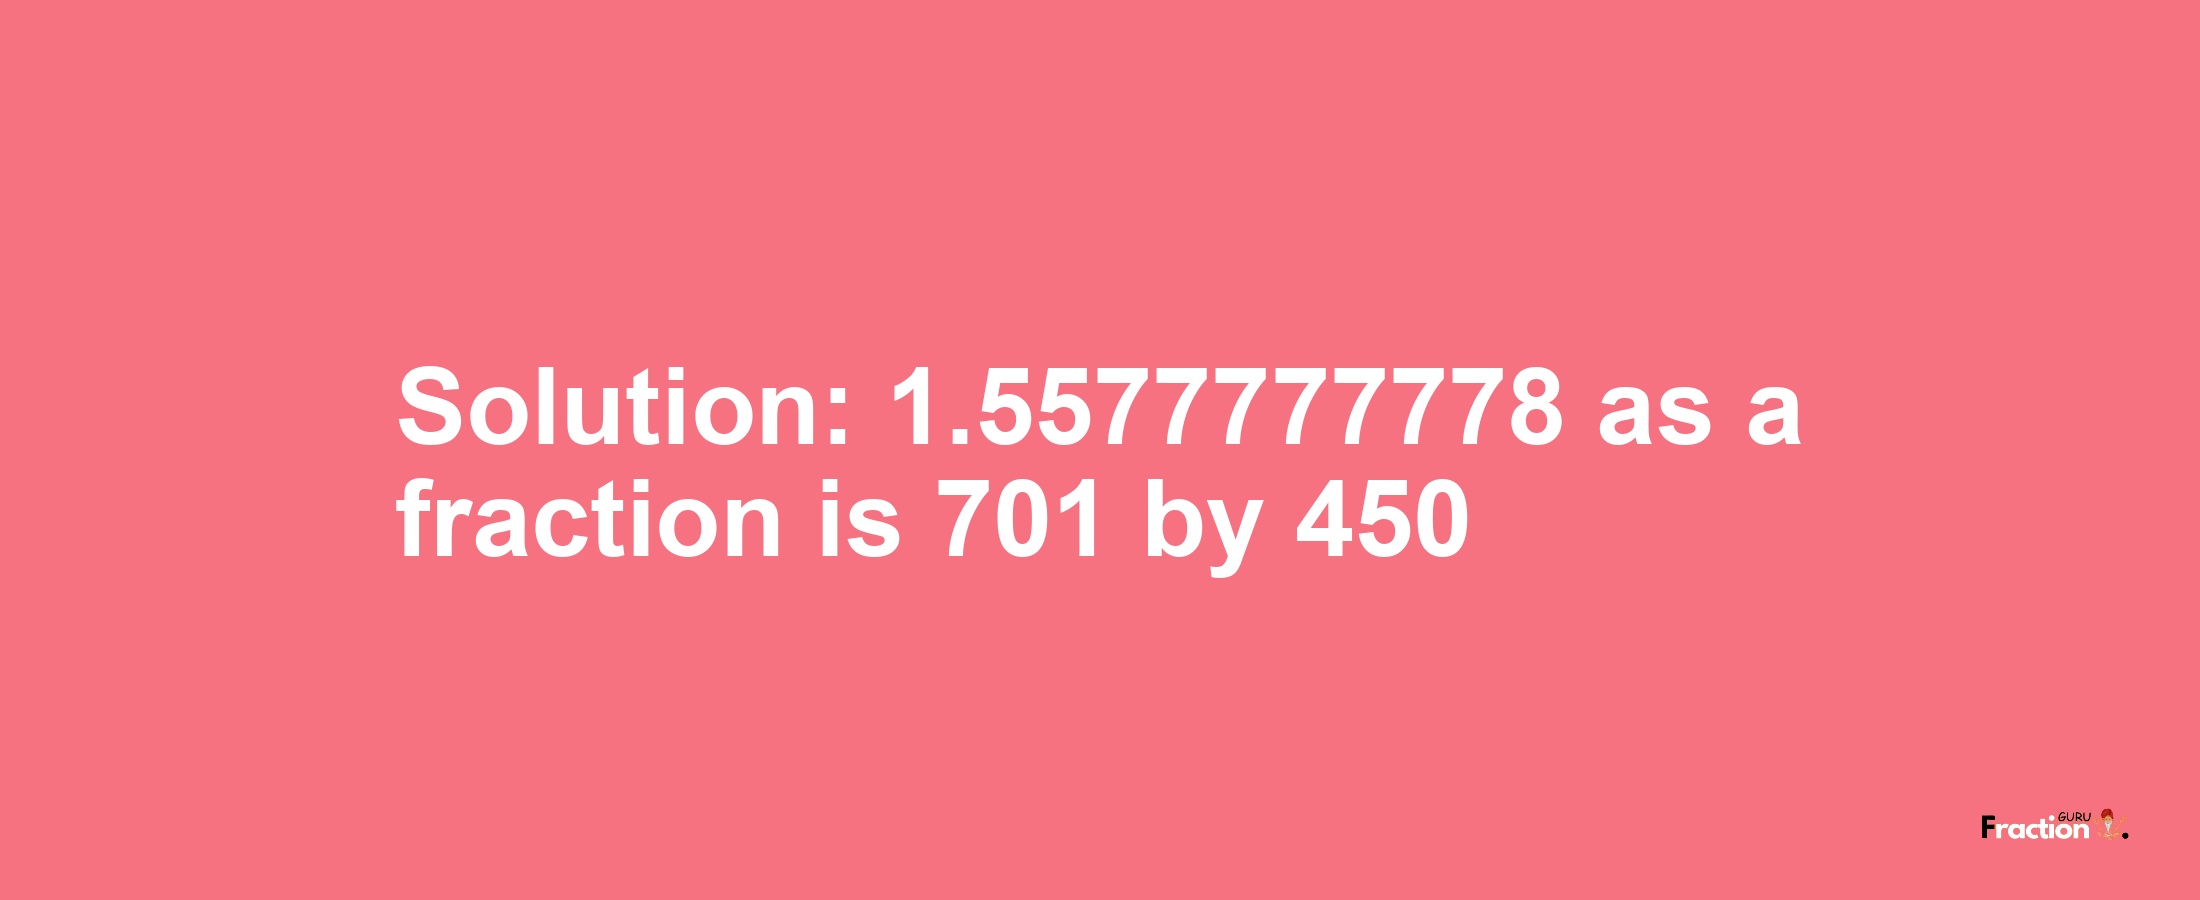 Solution:1.5577777778 as a fraction is 701/450